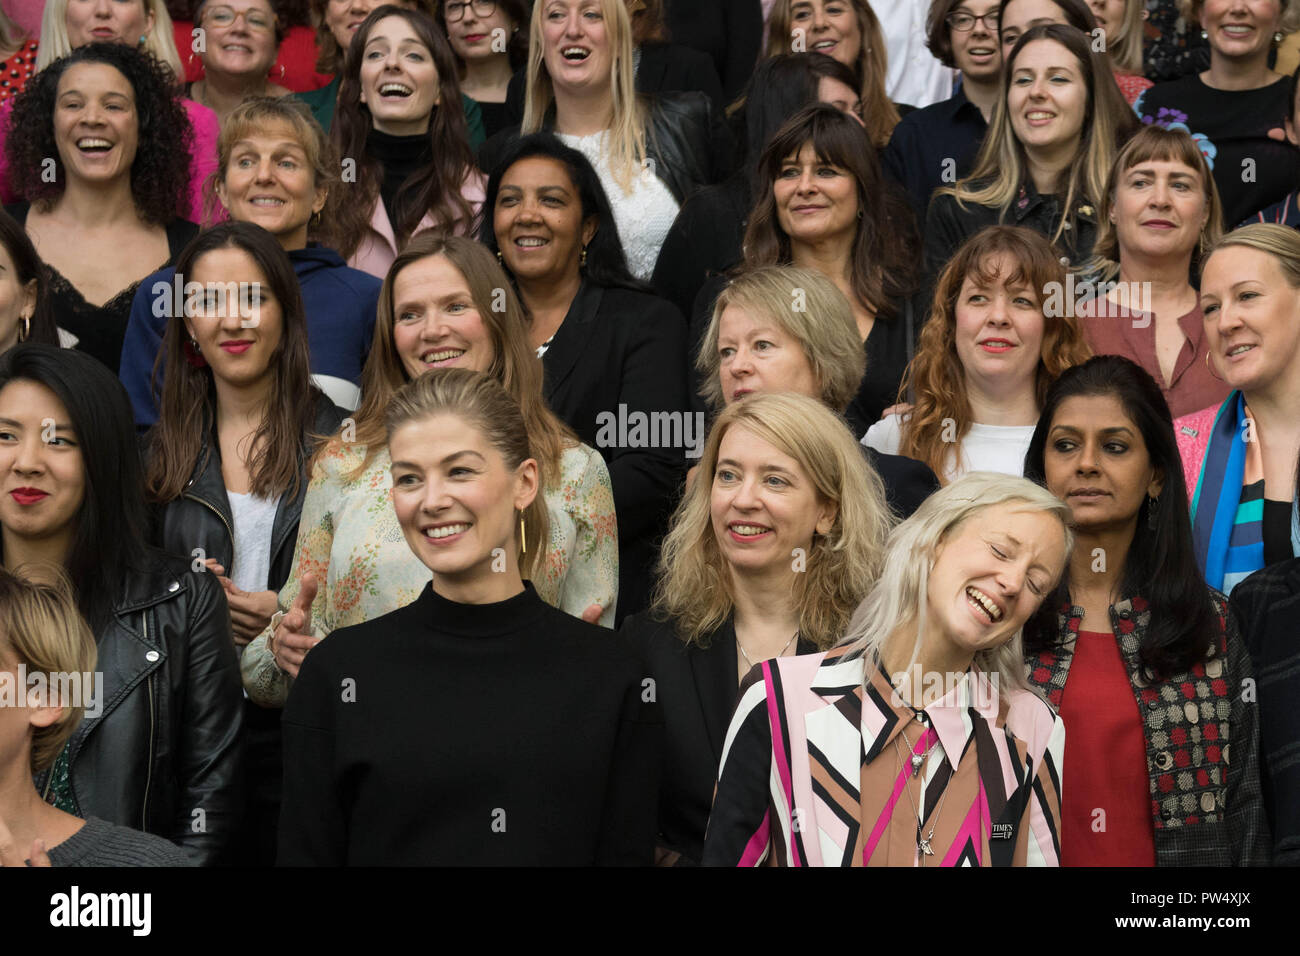 Female film makers and actors pose for a group photograph at the British Film Institute Film Festival on London's Southbank to mark women's contribution to the UK Film Industry. Stock Photo